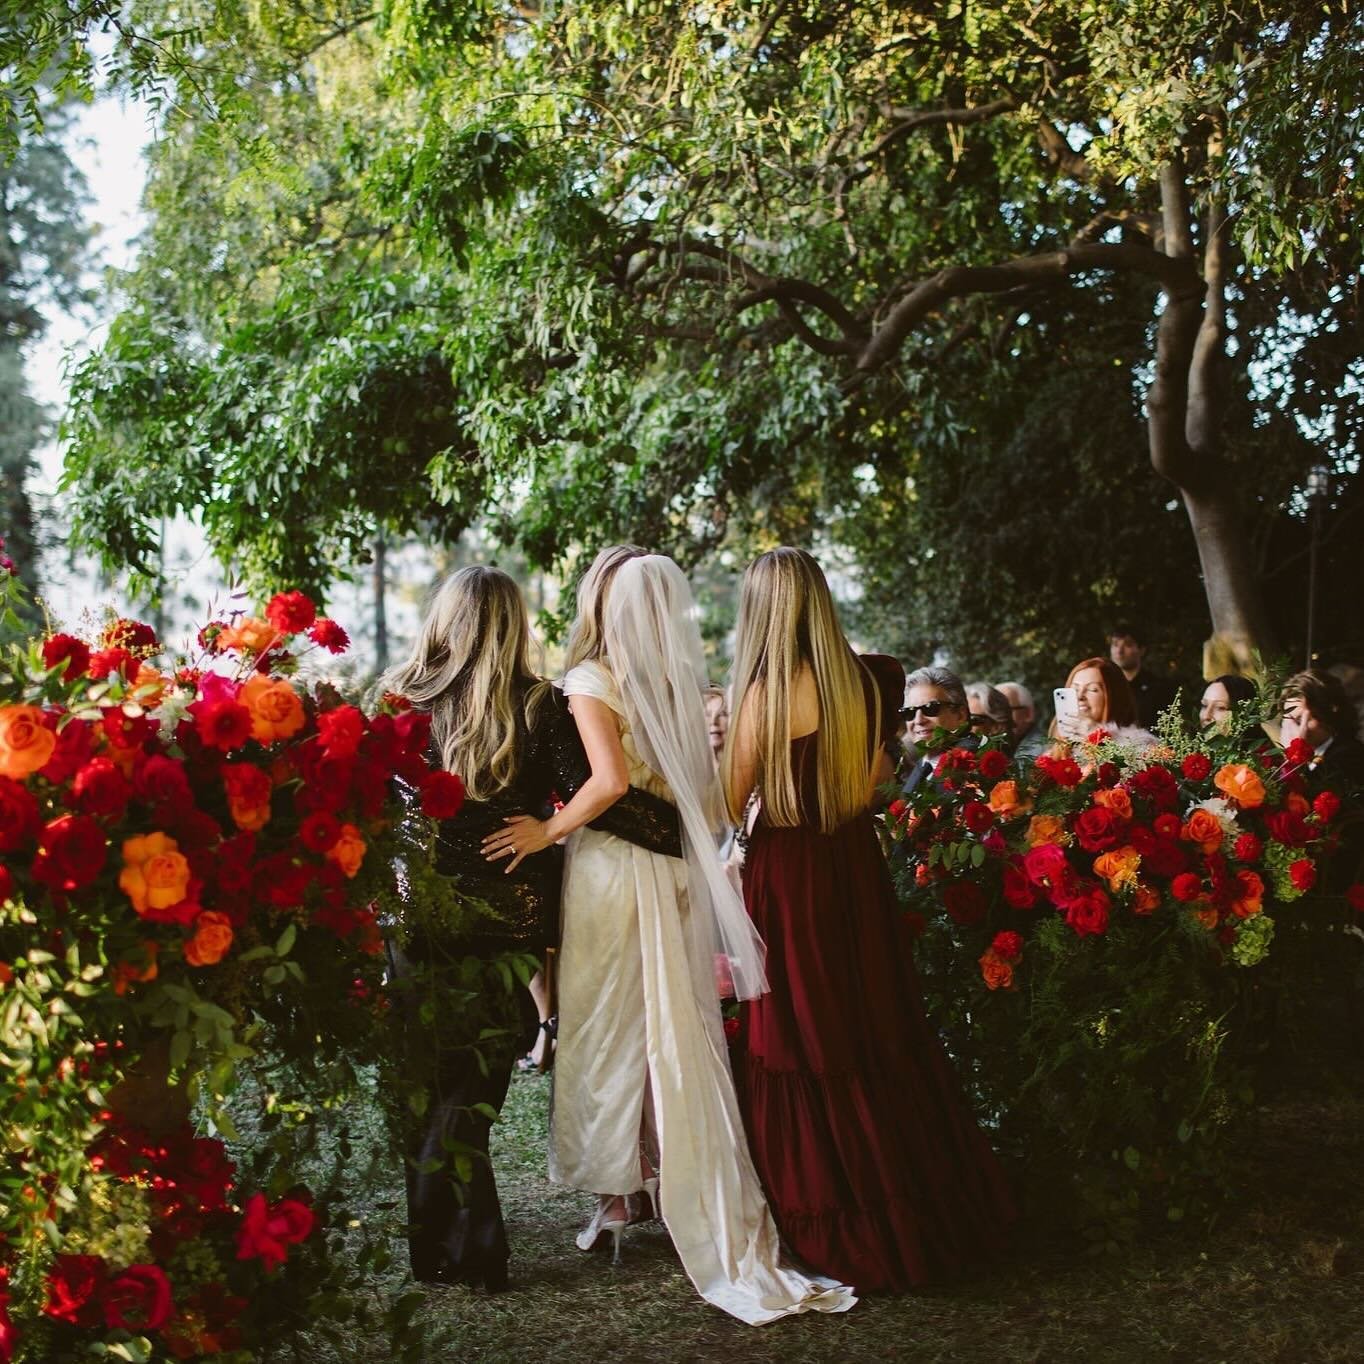 A special moment as the bride is accompanied down the aisle by her mother and sister.

Photo @theshalomimaginative 
Florals @hiddengardenflowers 
Catering @spottedhencatering 
Music @dartcollective 
Rentals @premiere_rents